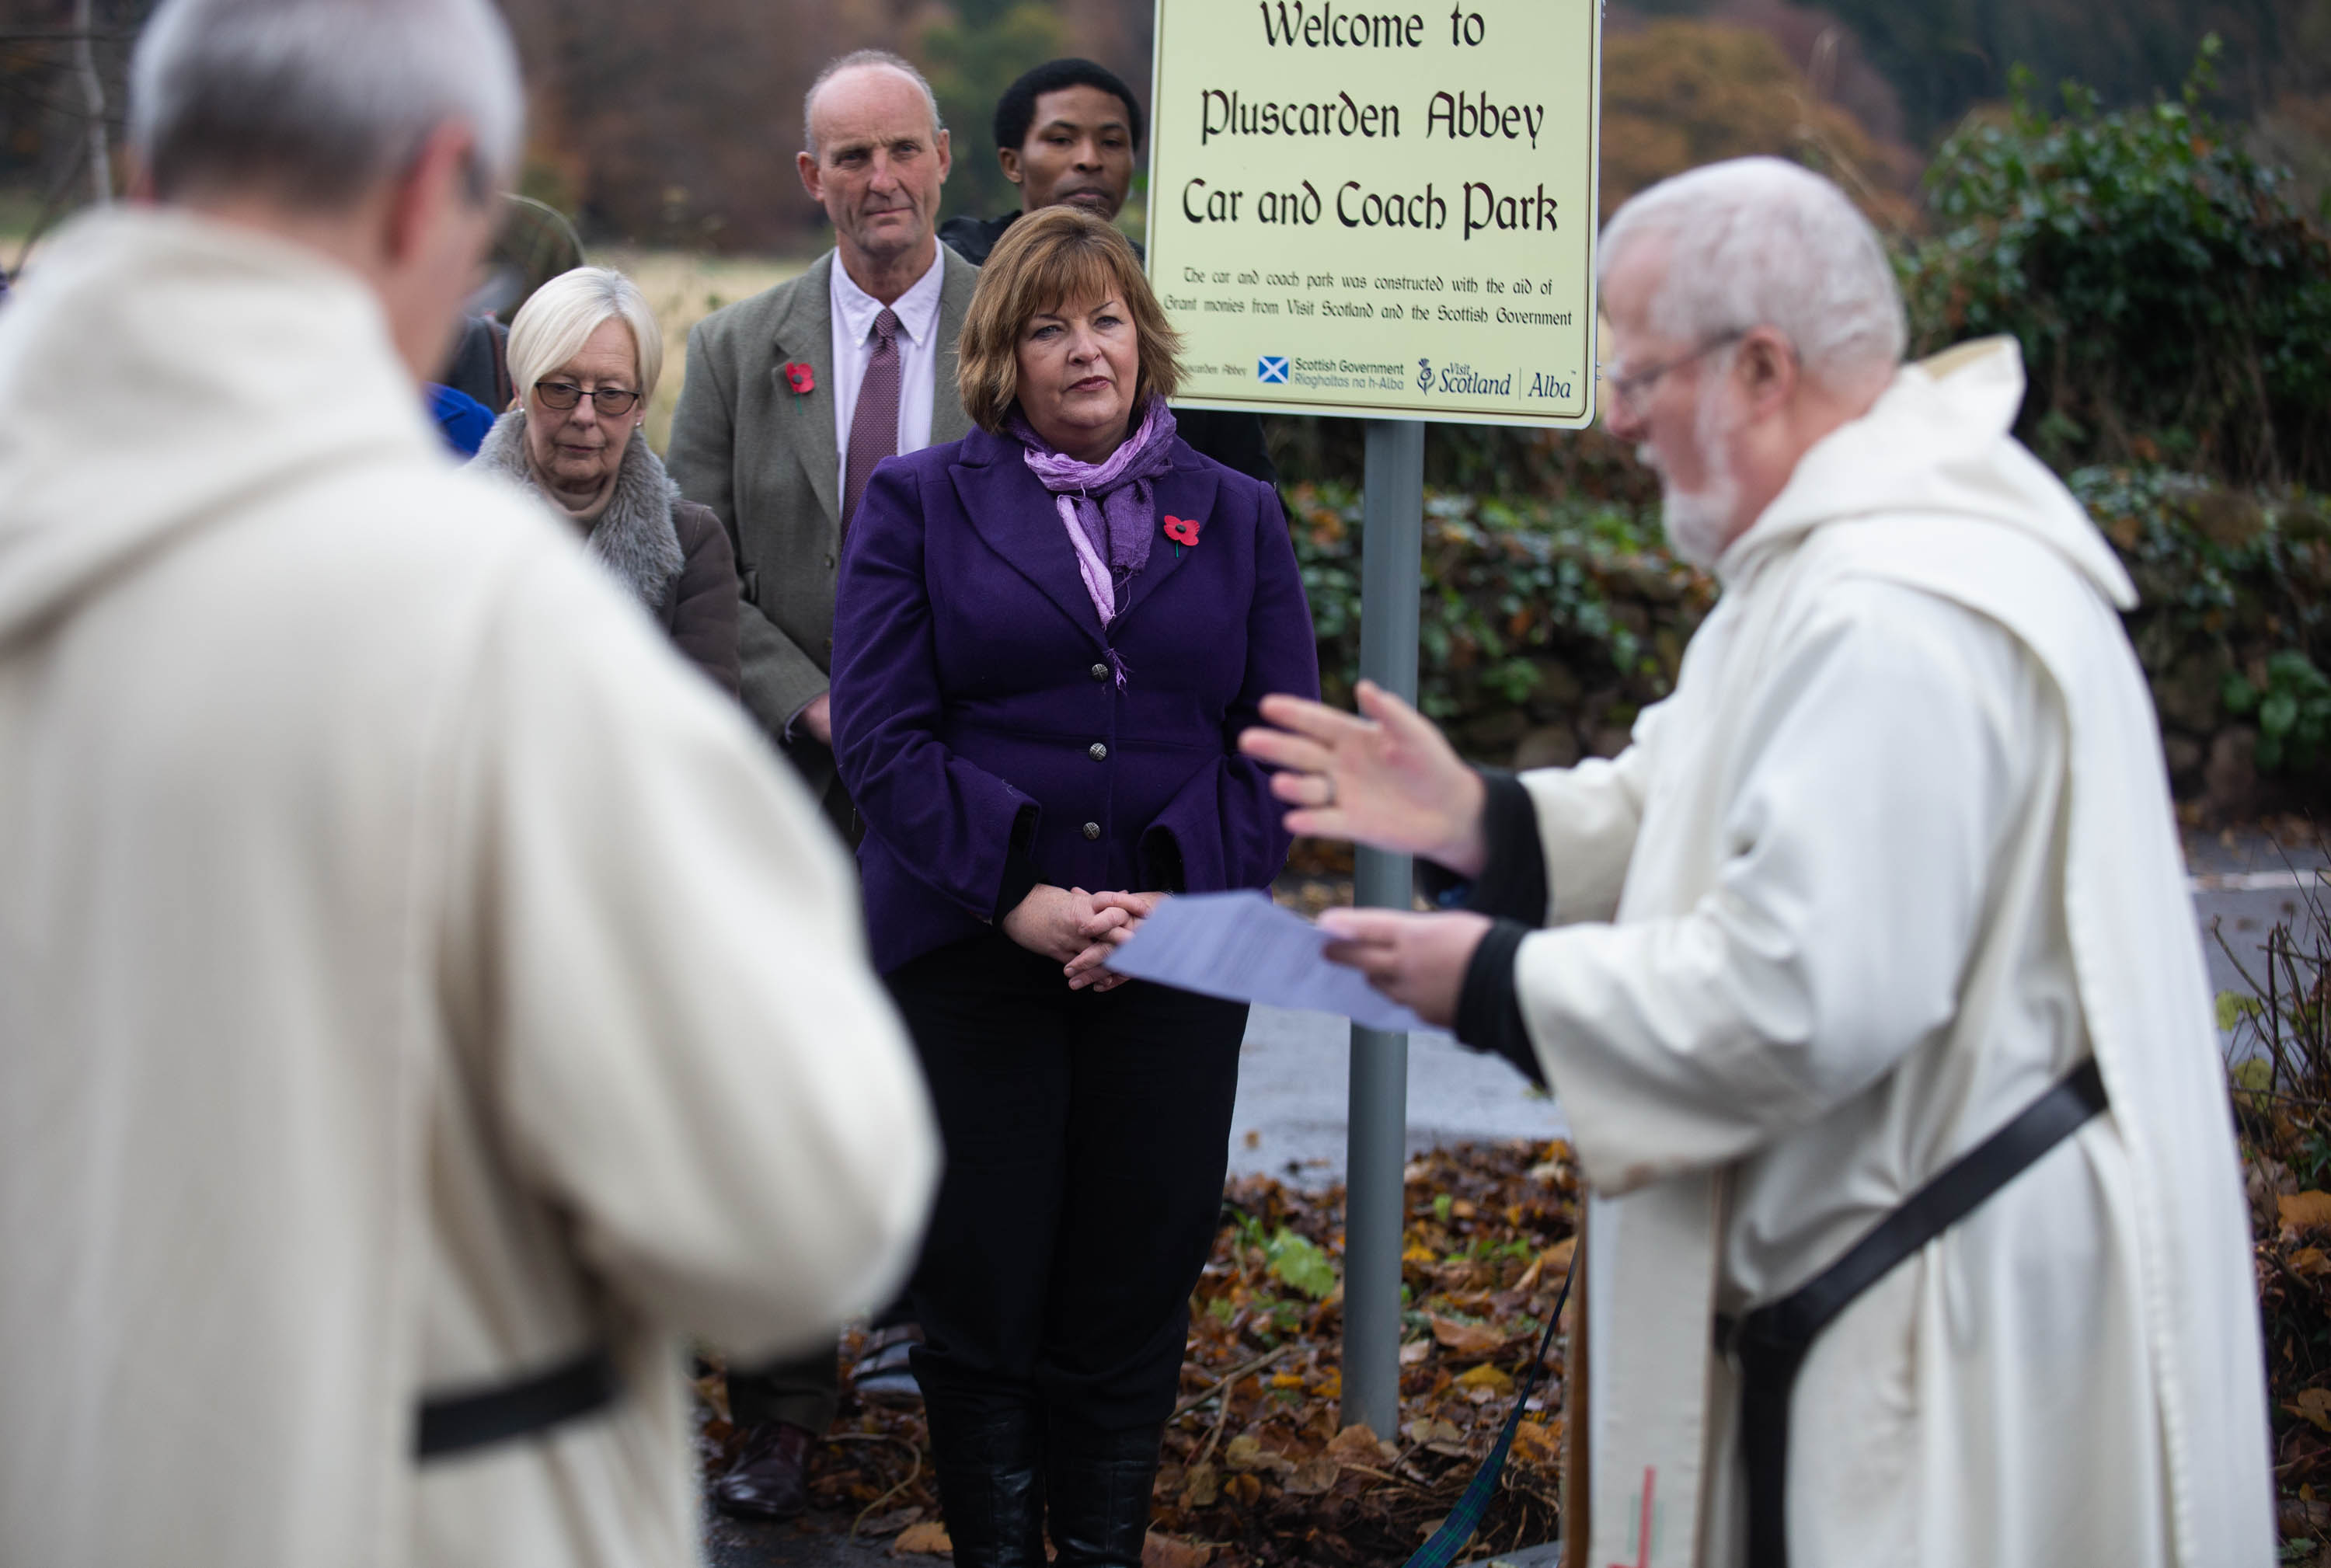 The Pluscarden Abbey car park was blessed with prayer and holy water during a visit by Scottish Government minister Fiona Hyslop.